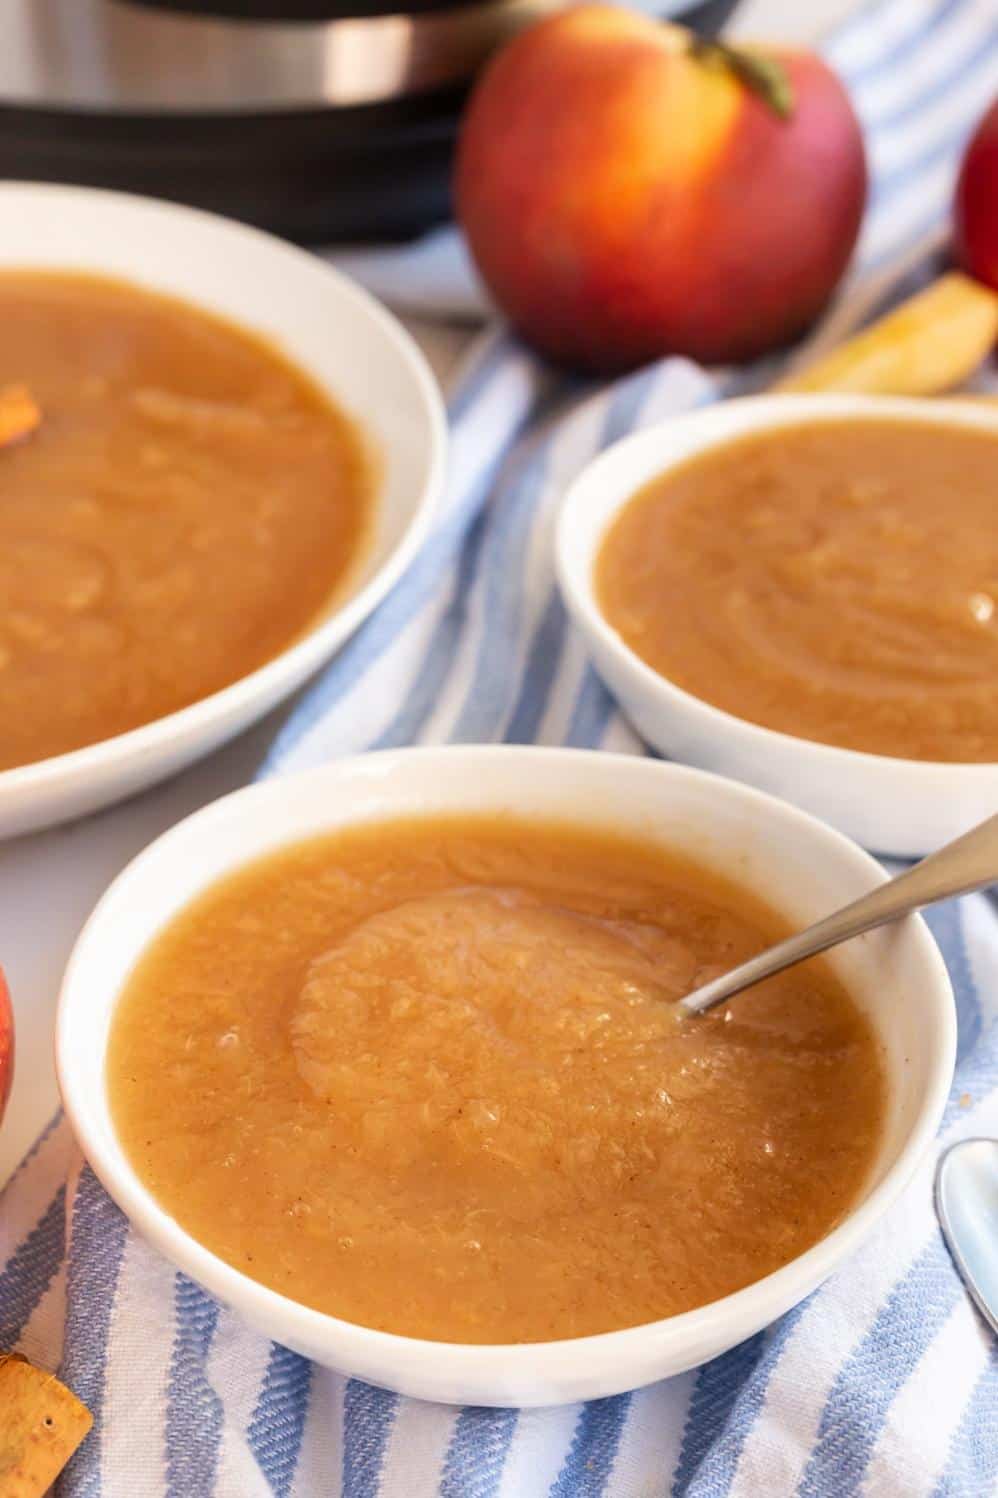  The vibrant colors of the peaches and apples make this applesauce a feast for the eyes as well as the taste buds.